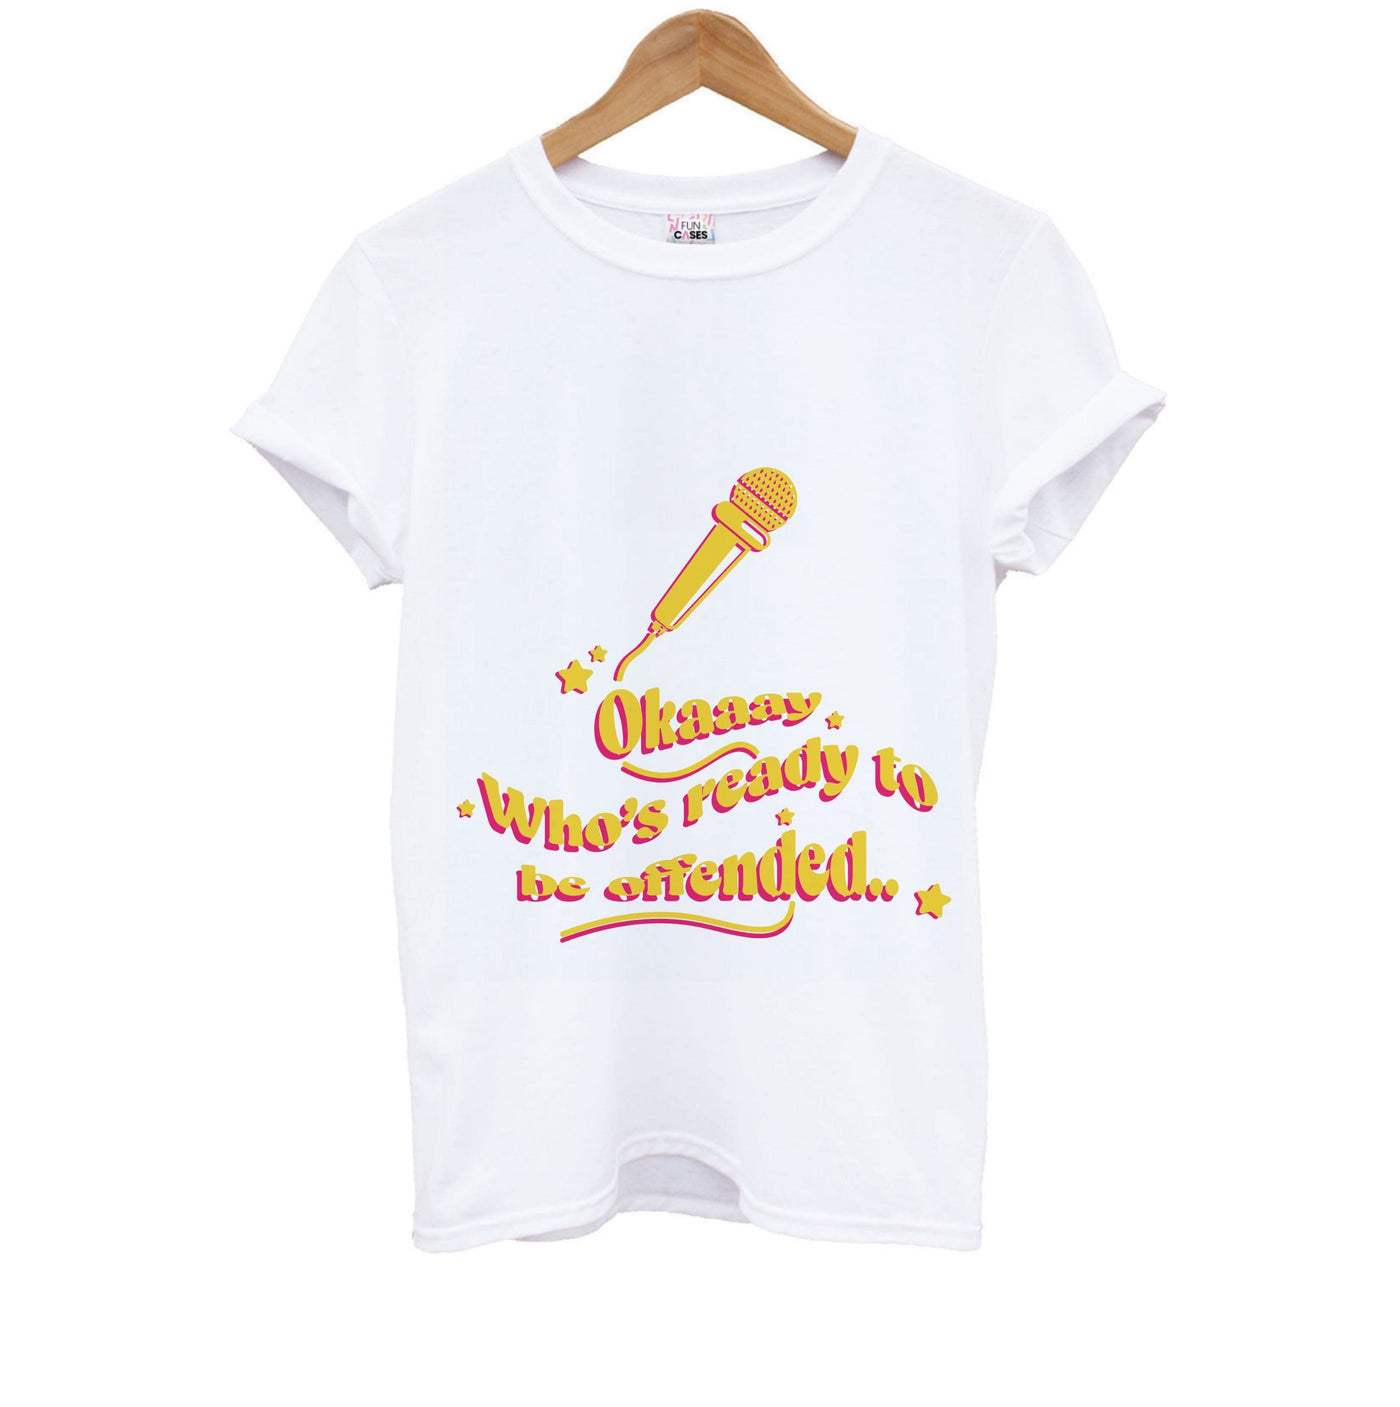 Who's Ready To Be Offended - Matt Rife Kids T-Shirt